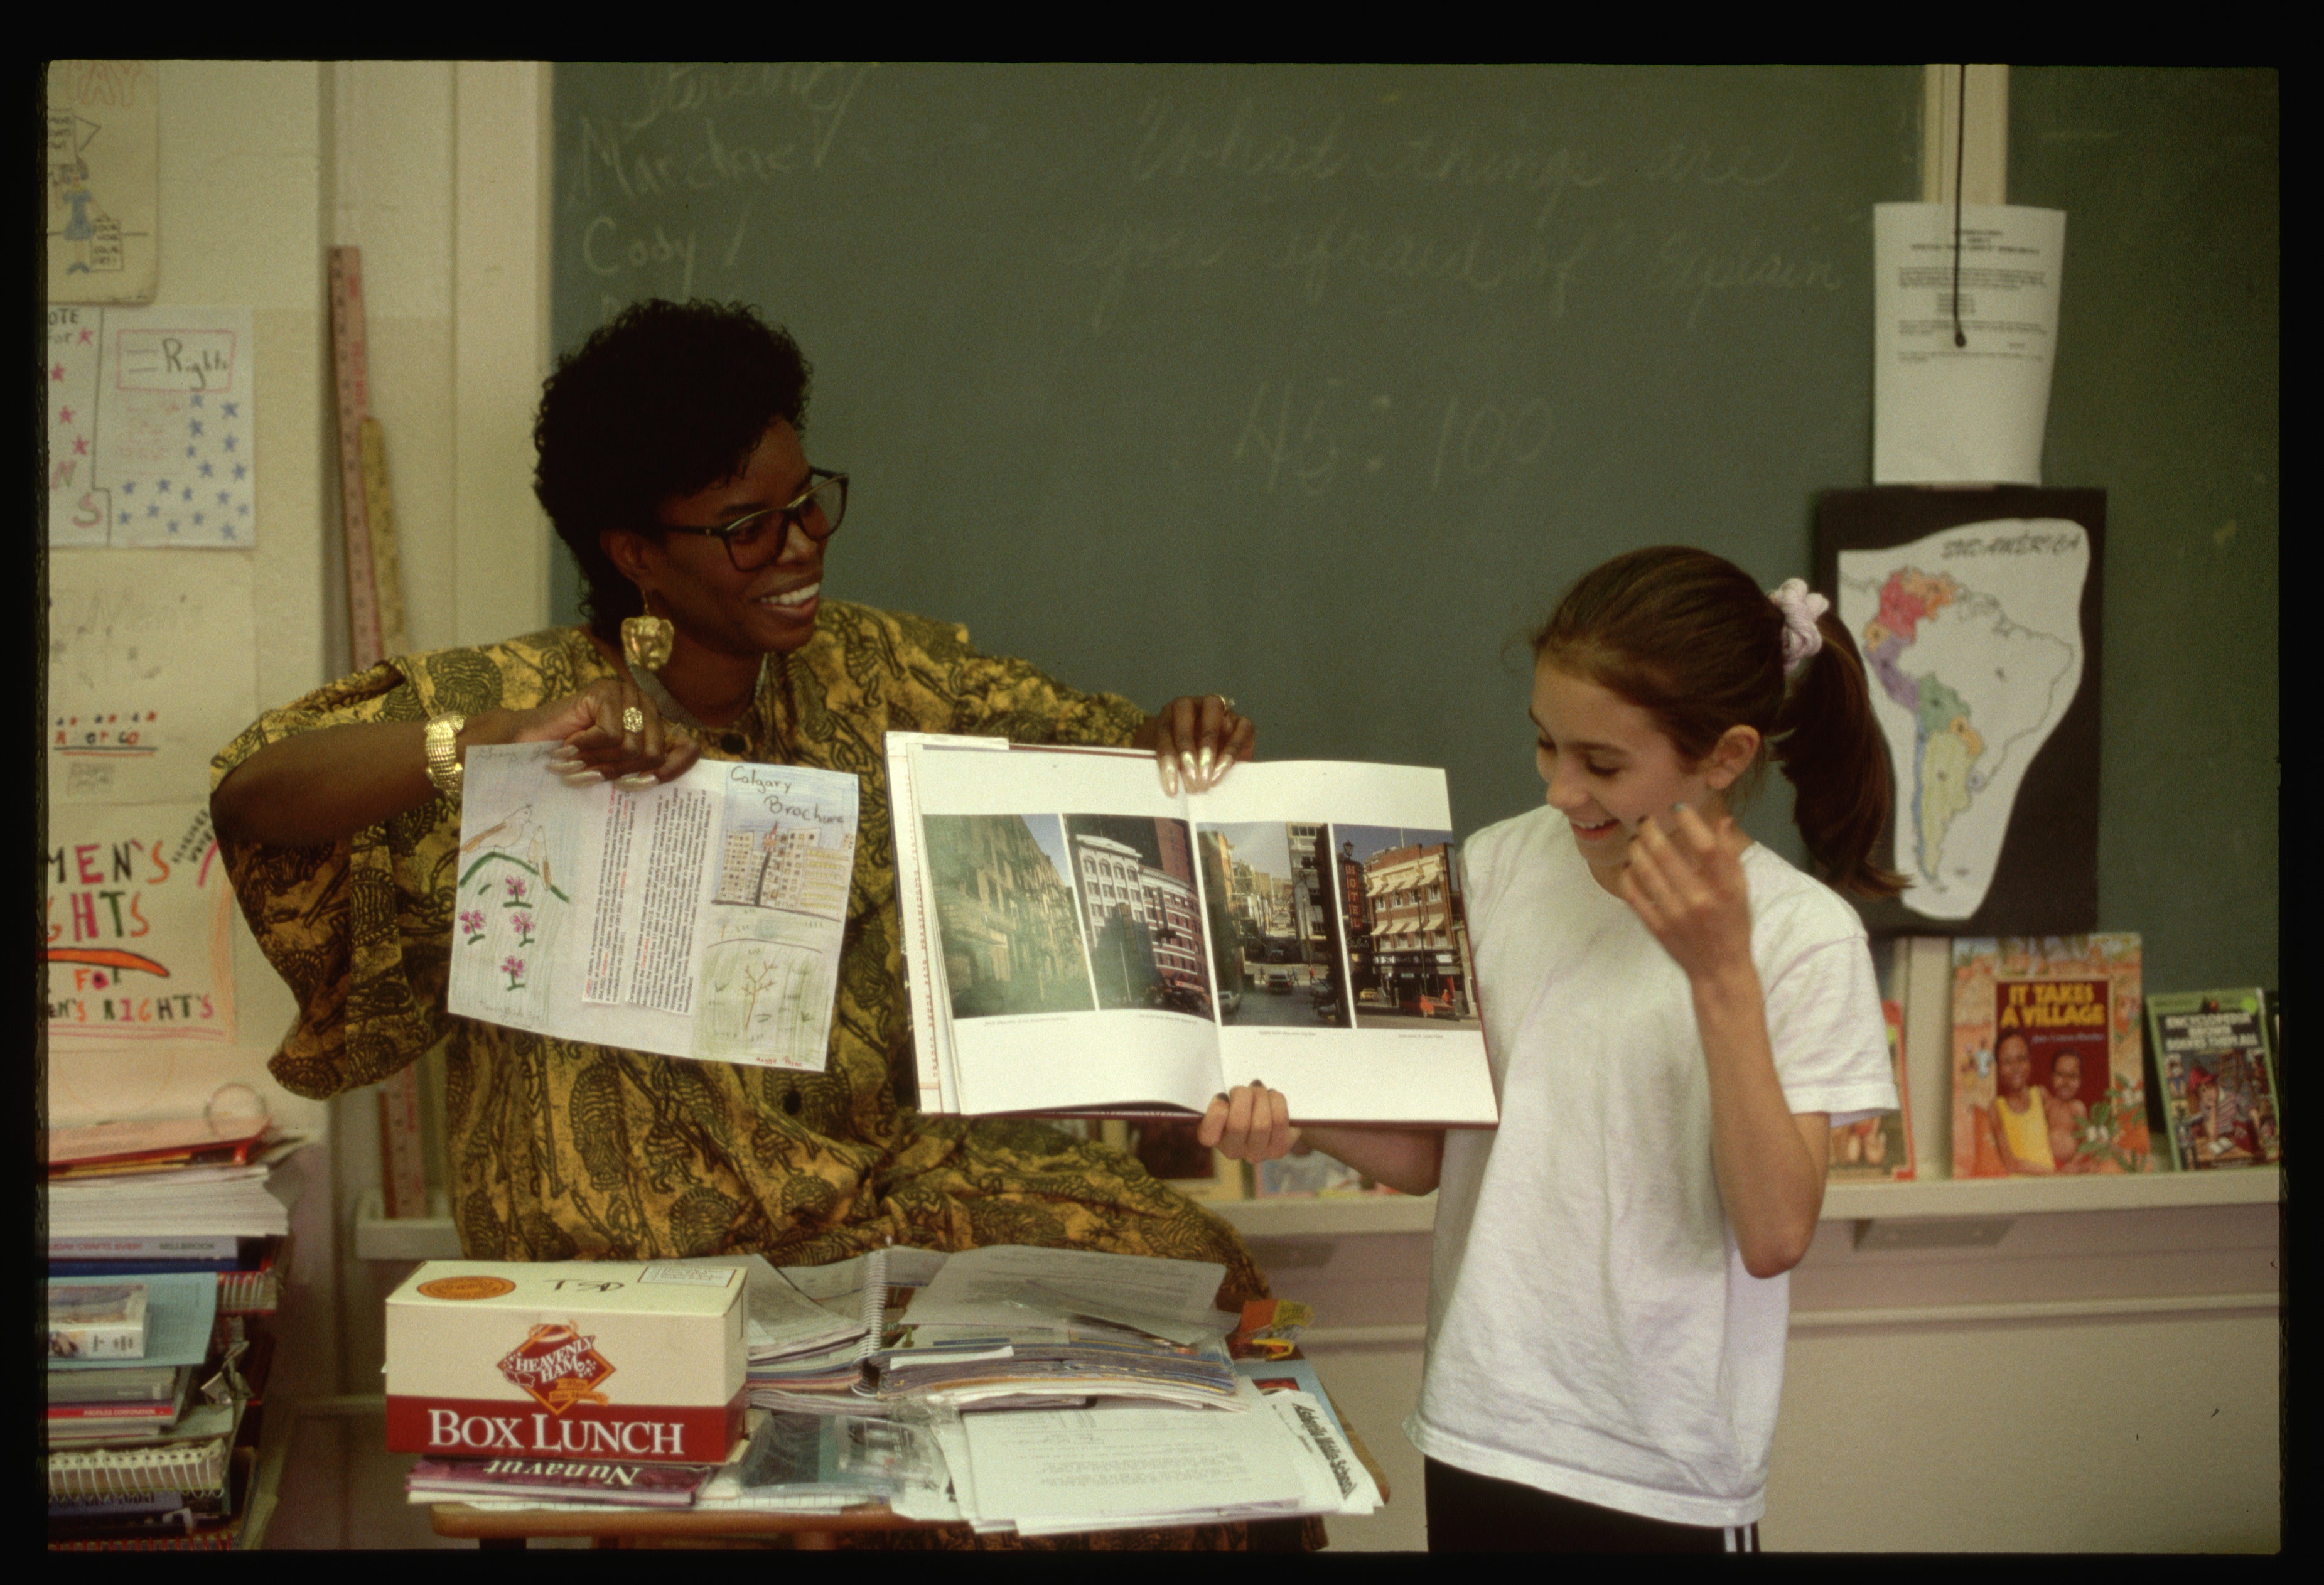 Teacher showing a student a book in a classroom with educational materials around